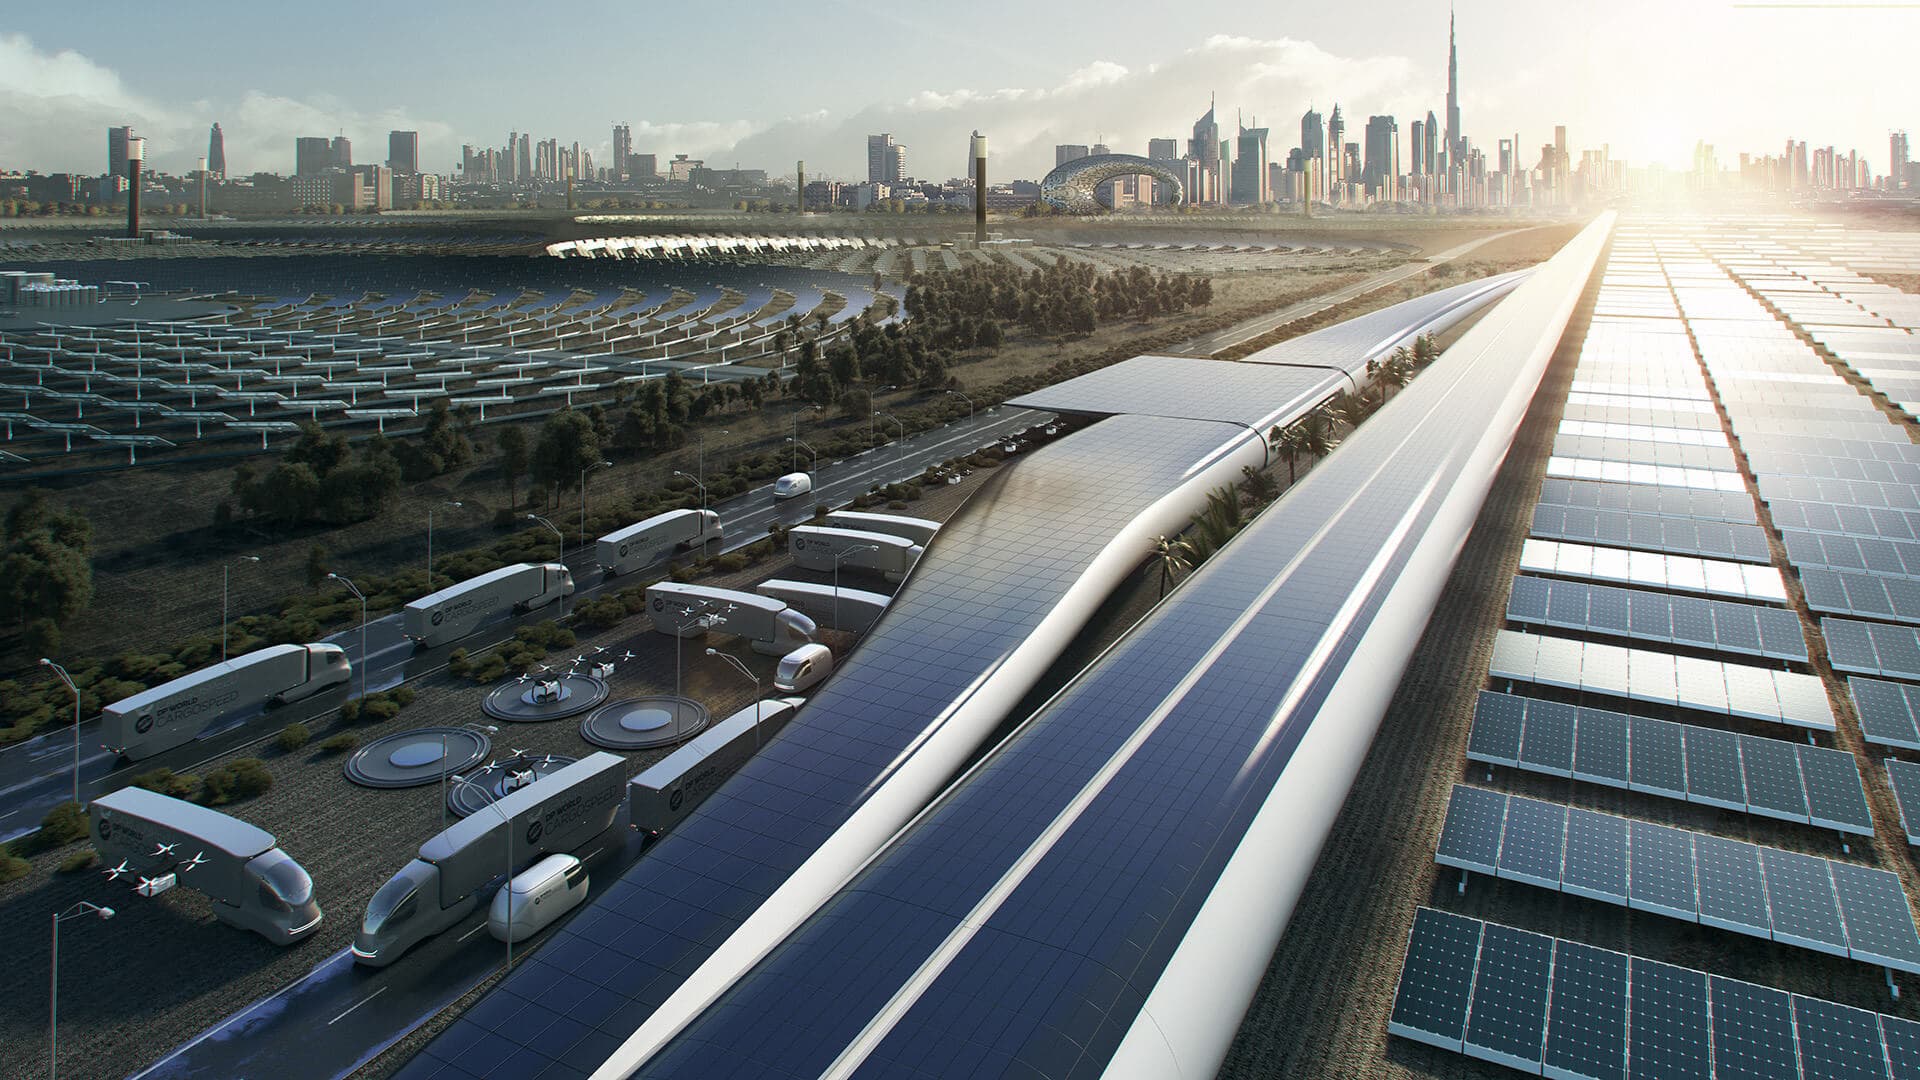 Virgin Hyperloop future vision for cargo with solar panels